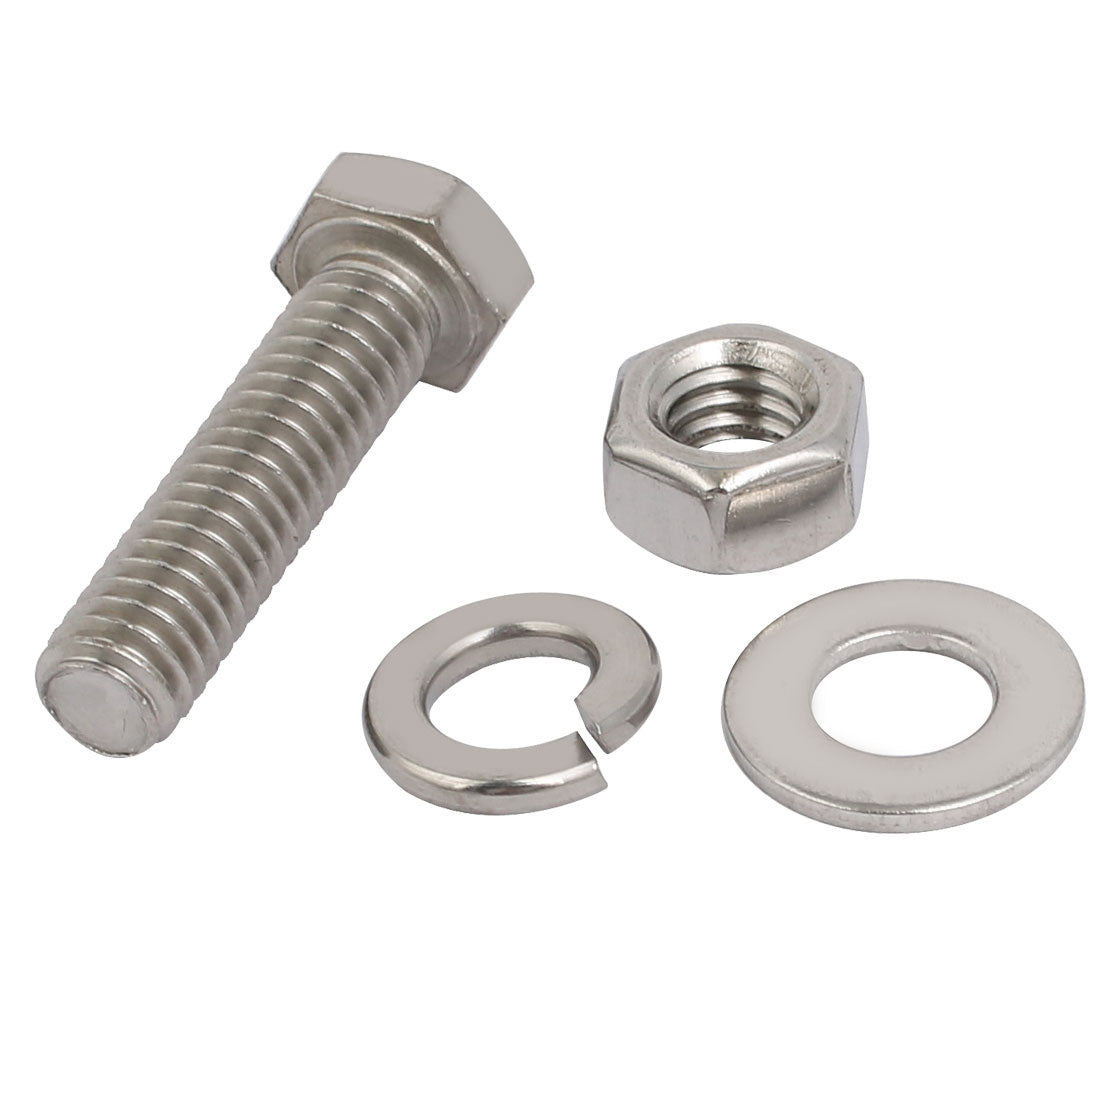 uxcell Uxcell 5Set 304 Stainless Steel 5/16"-18 Thread 1-1/2" Length Hex Bolt Kit w Washer Nut